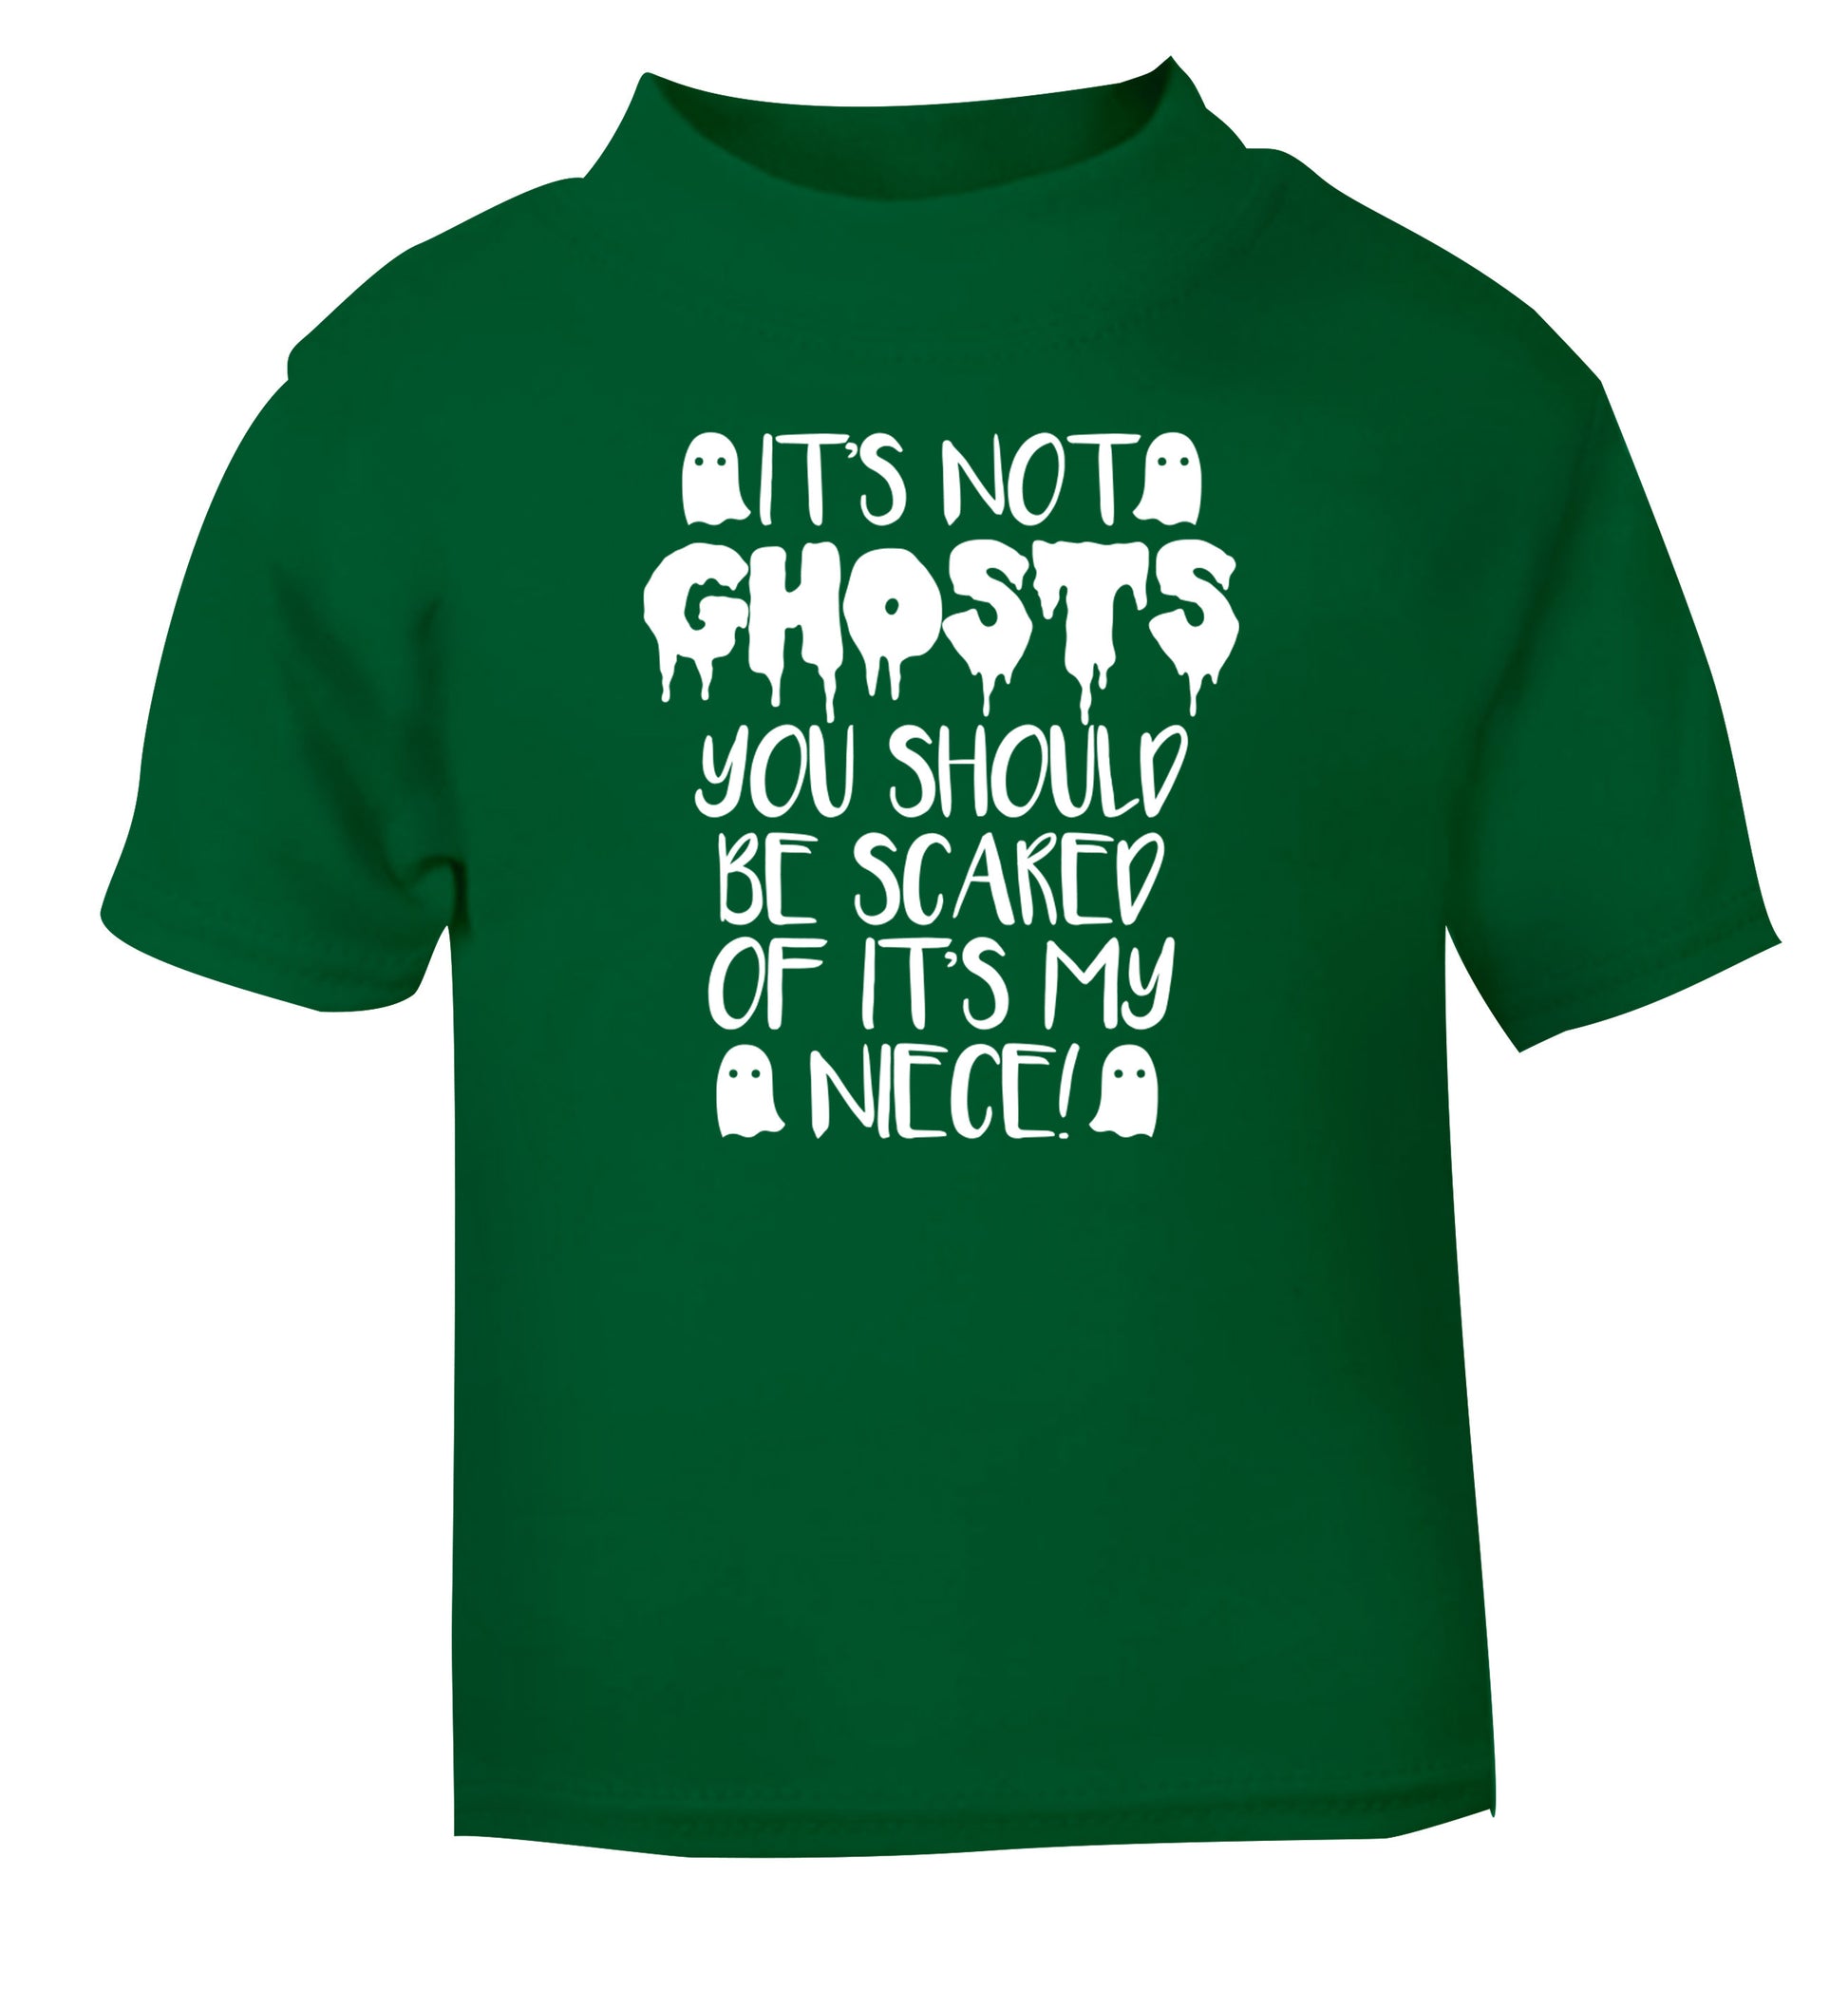 It's not ghosts you should be scared of it's my niece! green Baby Toddler Tshirt 2 Years